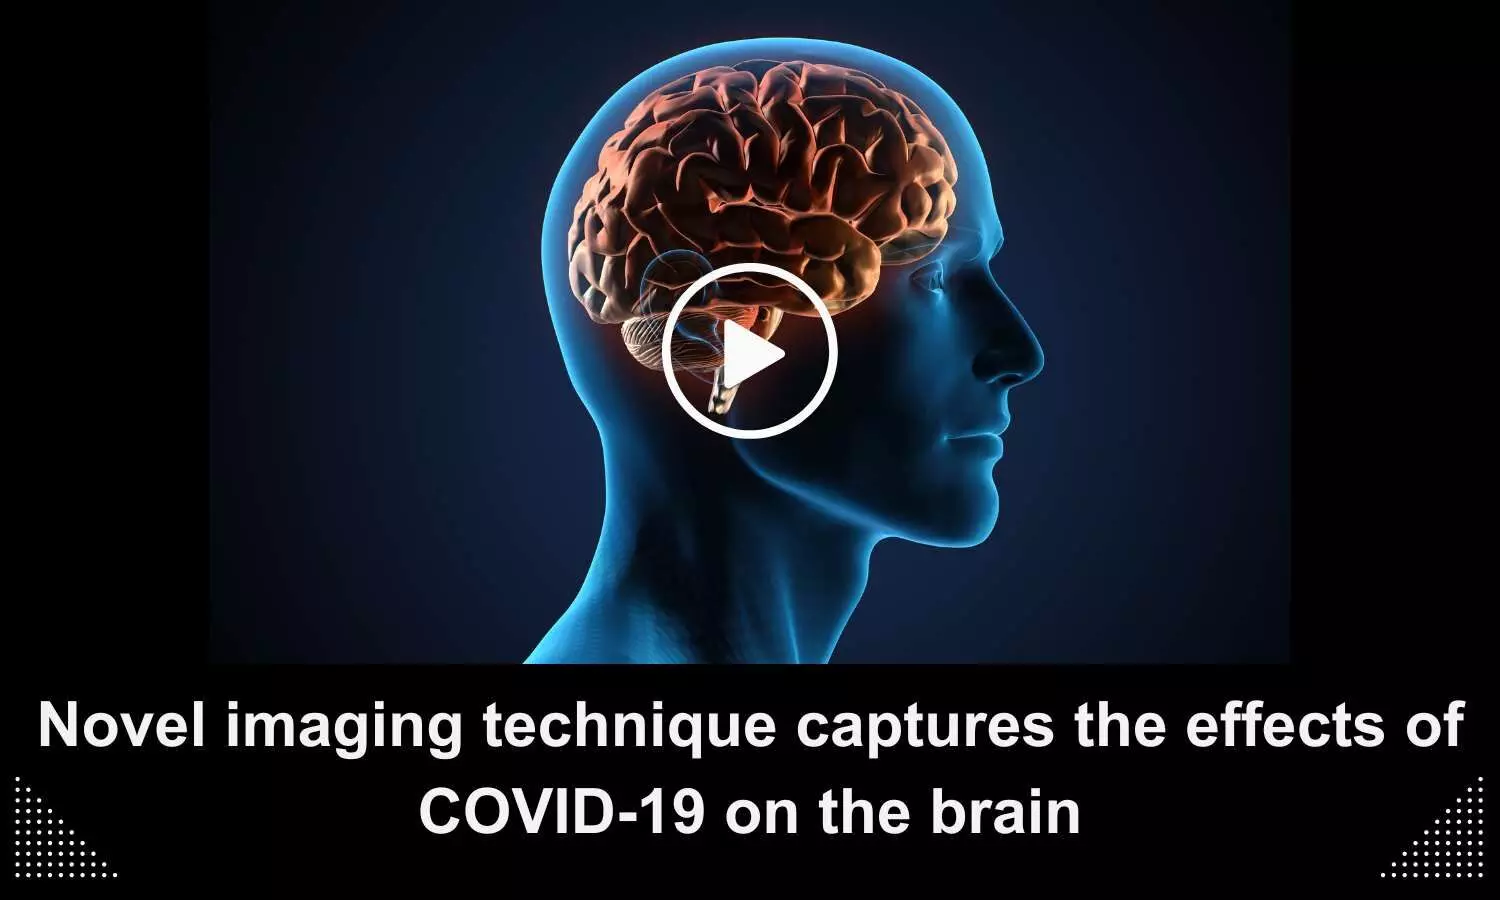 Novel imaging technique captures the effects of COVID-19 on the brain